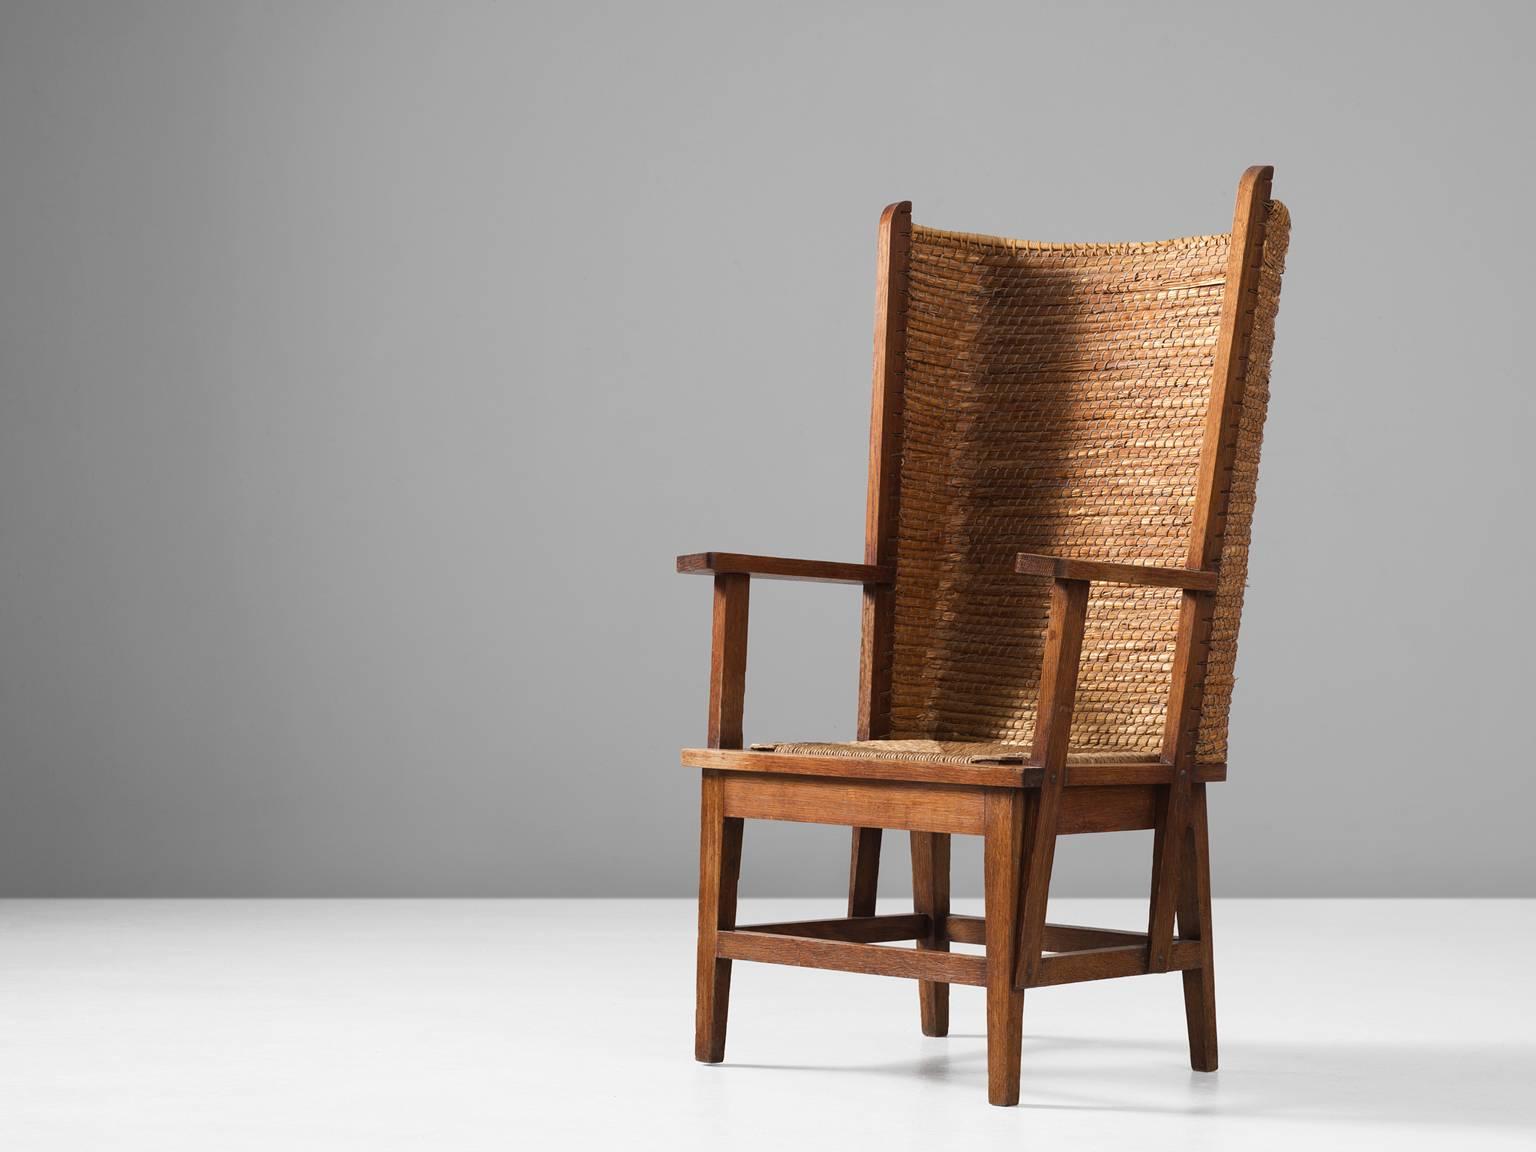 Armchair, in oak and straw, Scotland, 1940s. 

Orkney armchair with woven high back of rush or straw. A traditional oak chair in solid oak with woven seating. Exceptional addition is the high back of woven grass. It gives a secure and sheltered